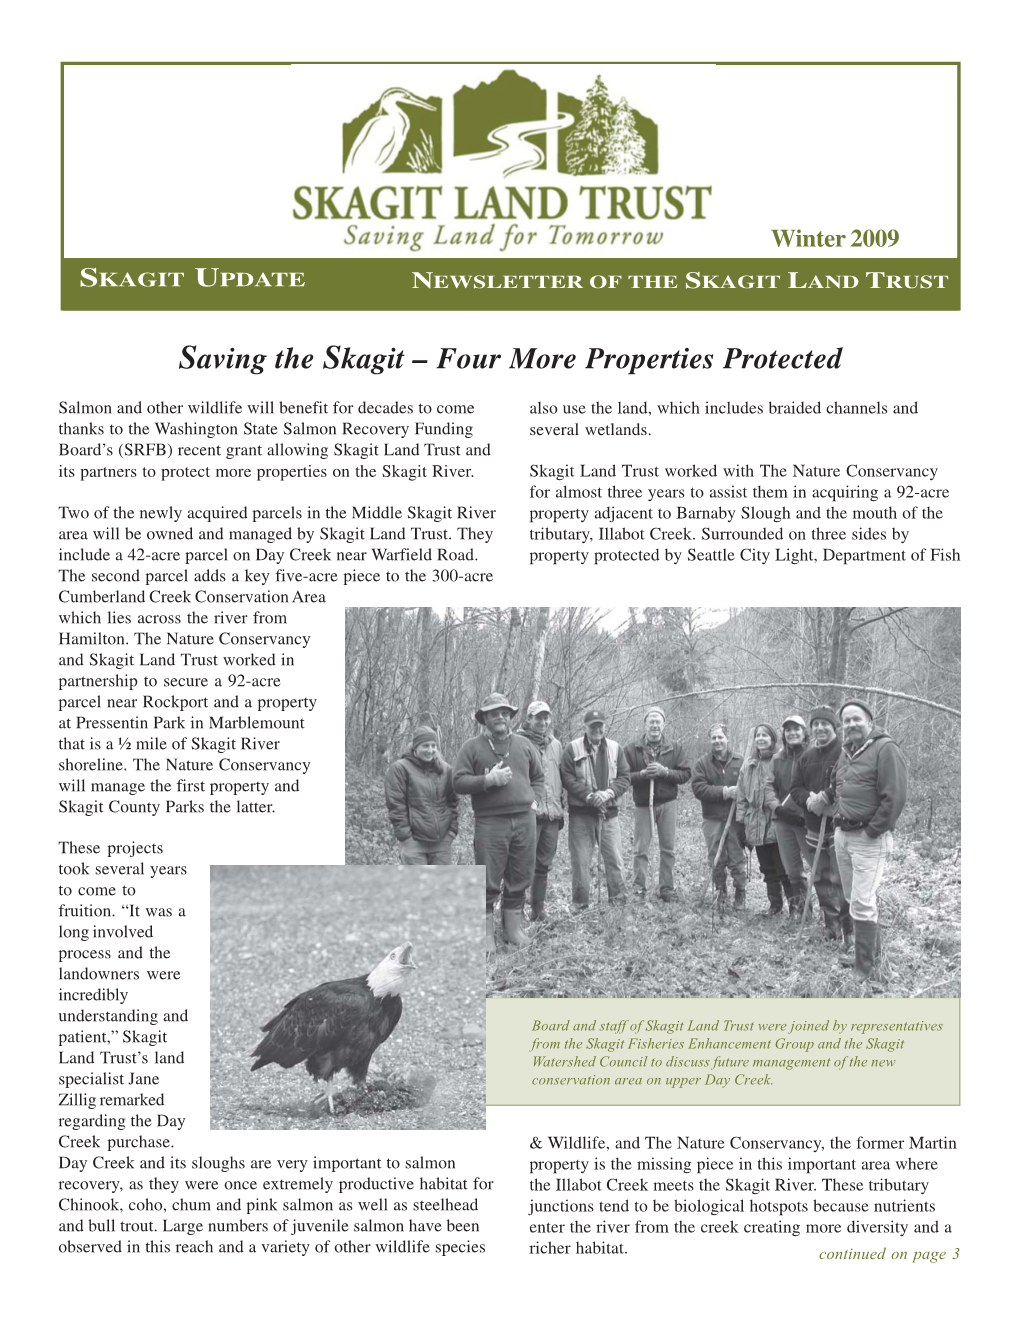 Saving the Skagit – Four More Properties Protected